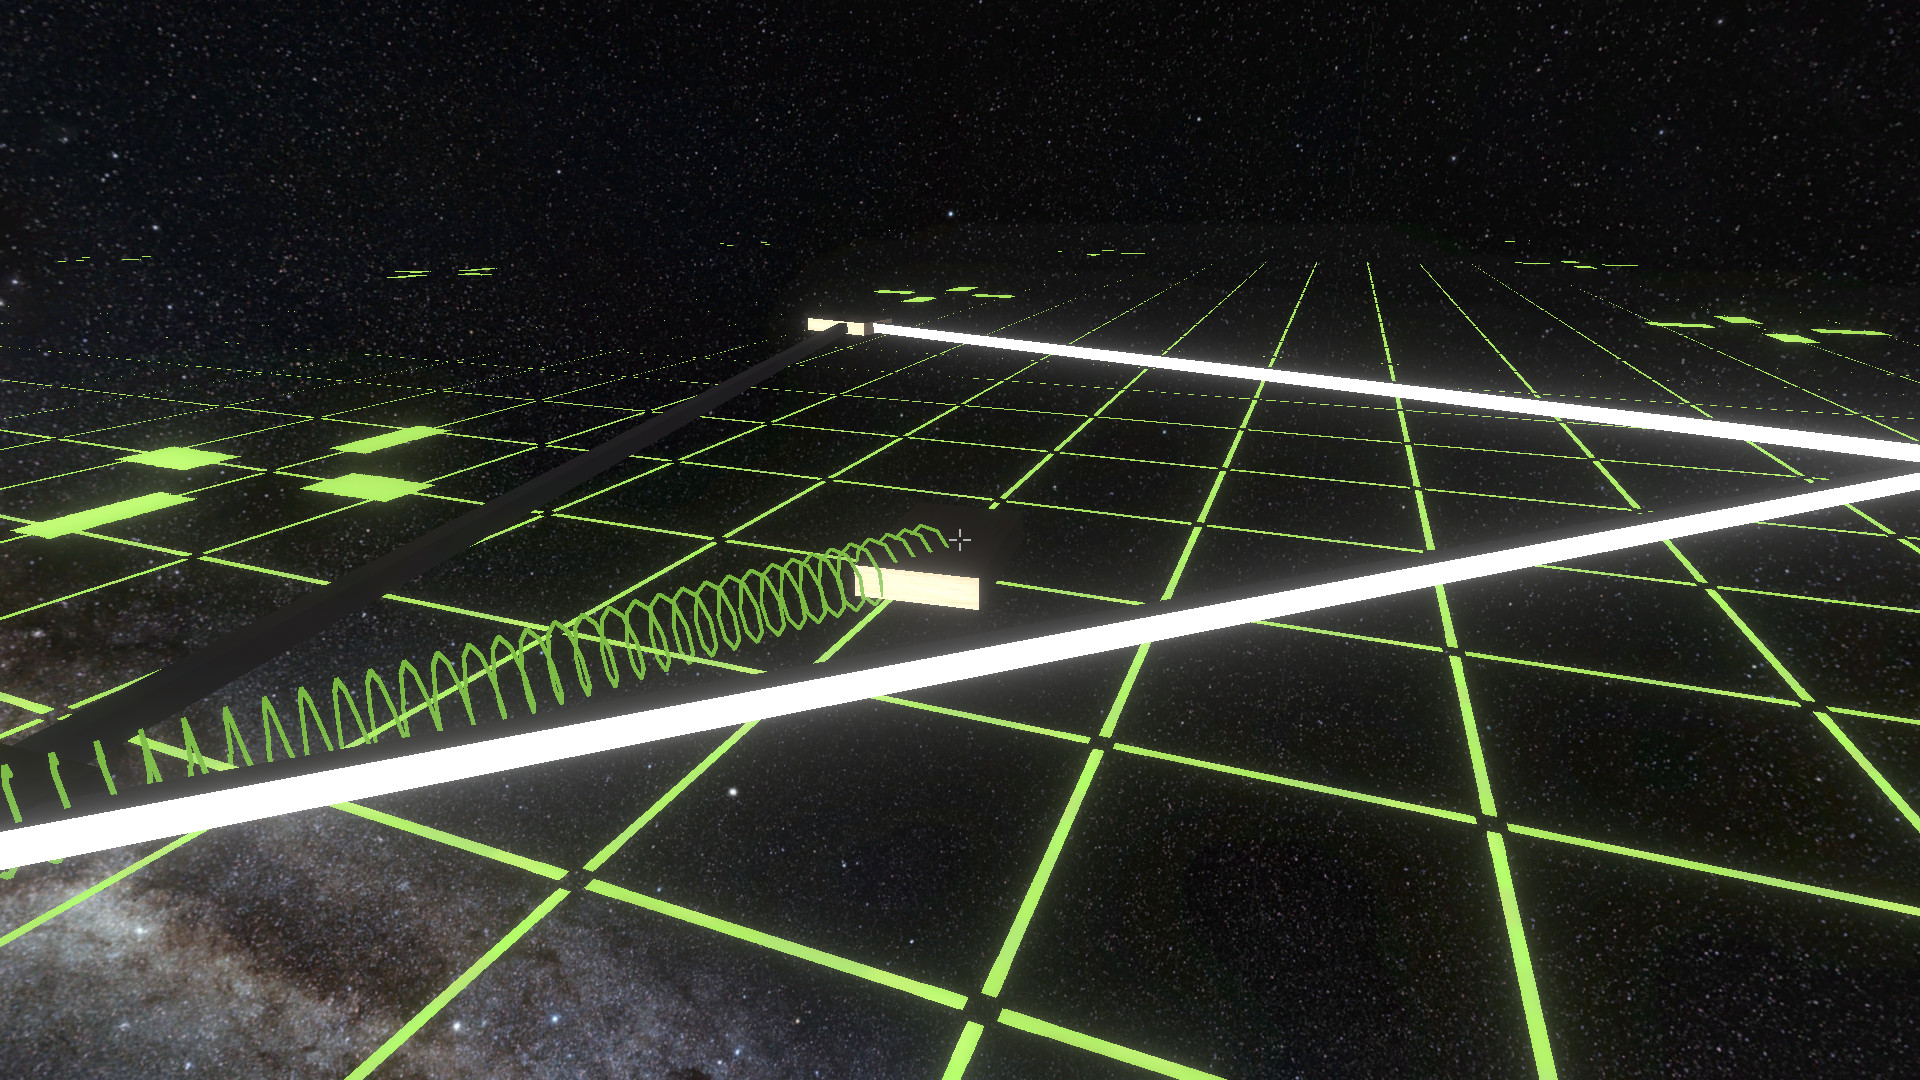 Spacetime Dimension Free Download